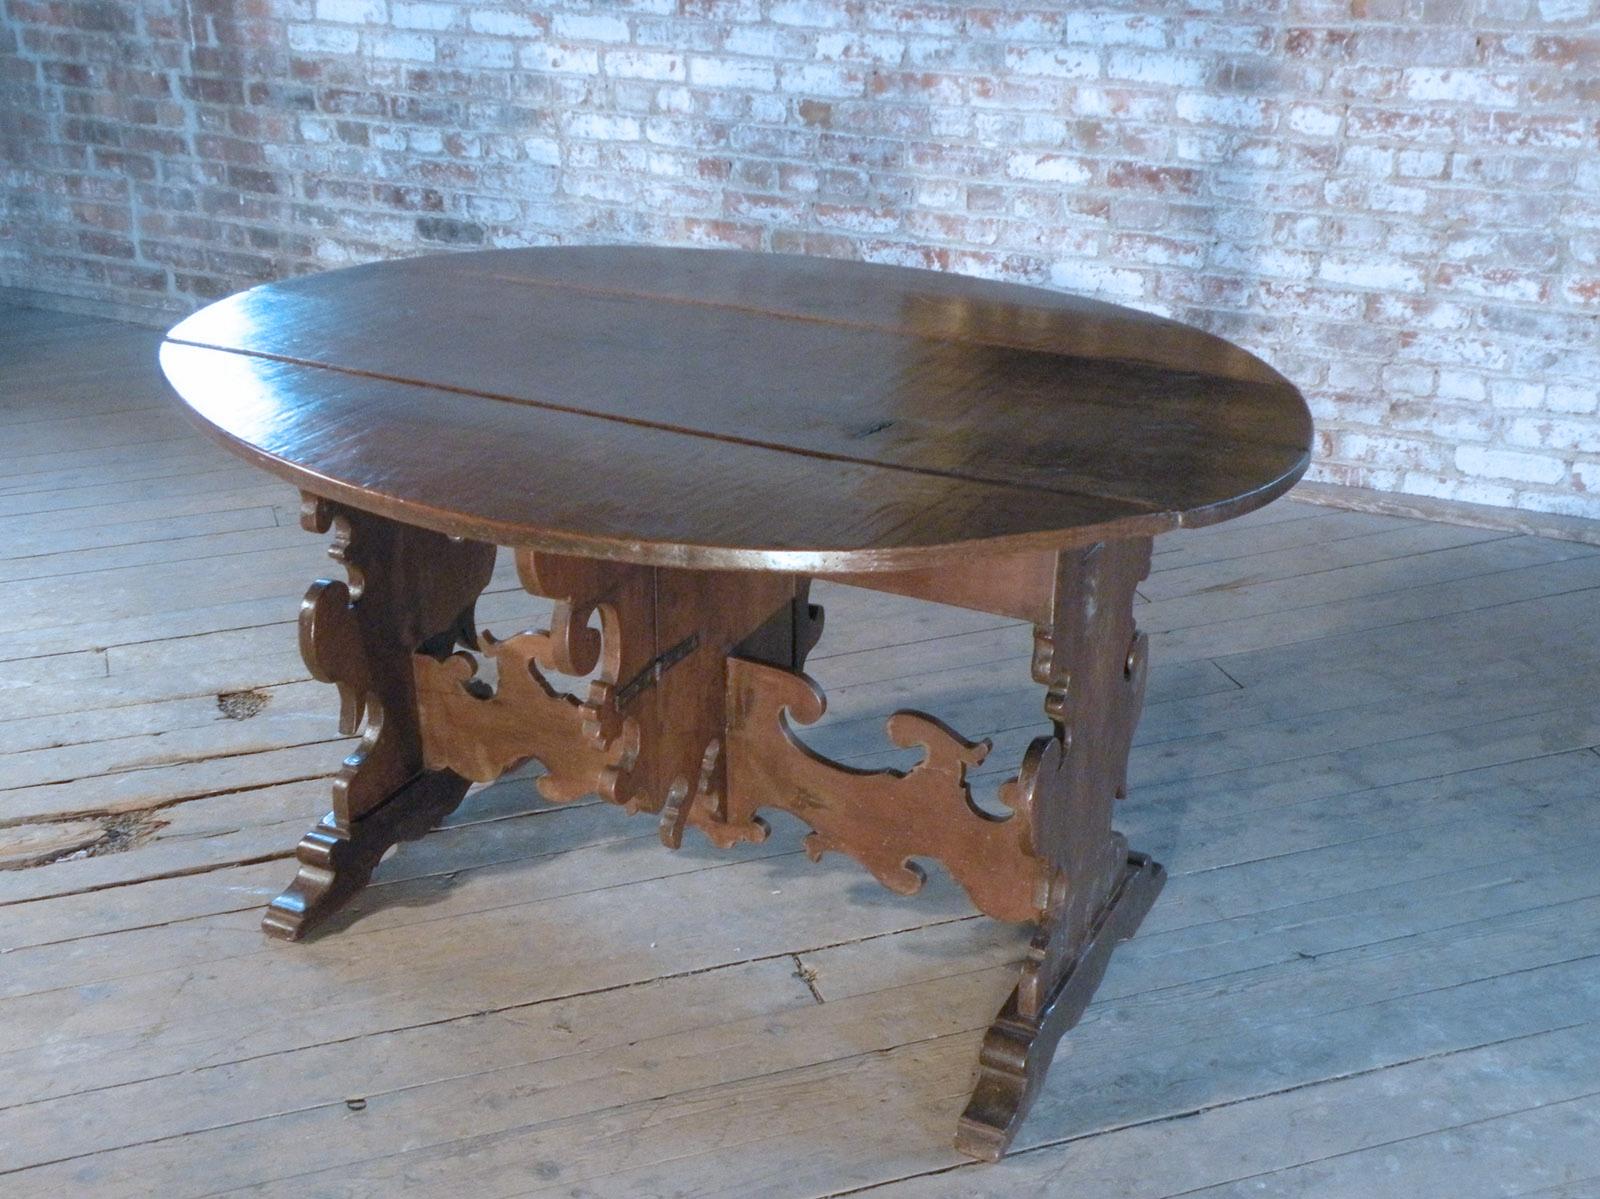 Well developed, decorative Italian Baroque 17th Century Drop-Leaf Table of  Beautiful quality with a rich patina and good size. The table can be used in different ways: Opened on both sides to an oval shape by supporting the two fold-up leaves with